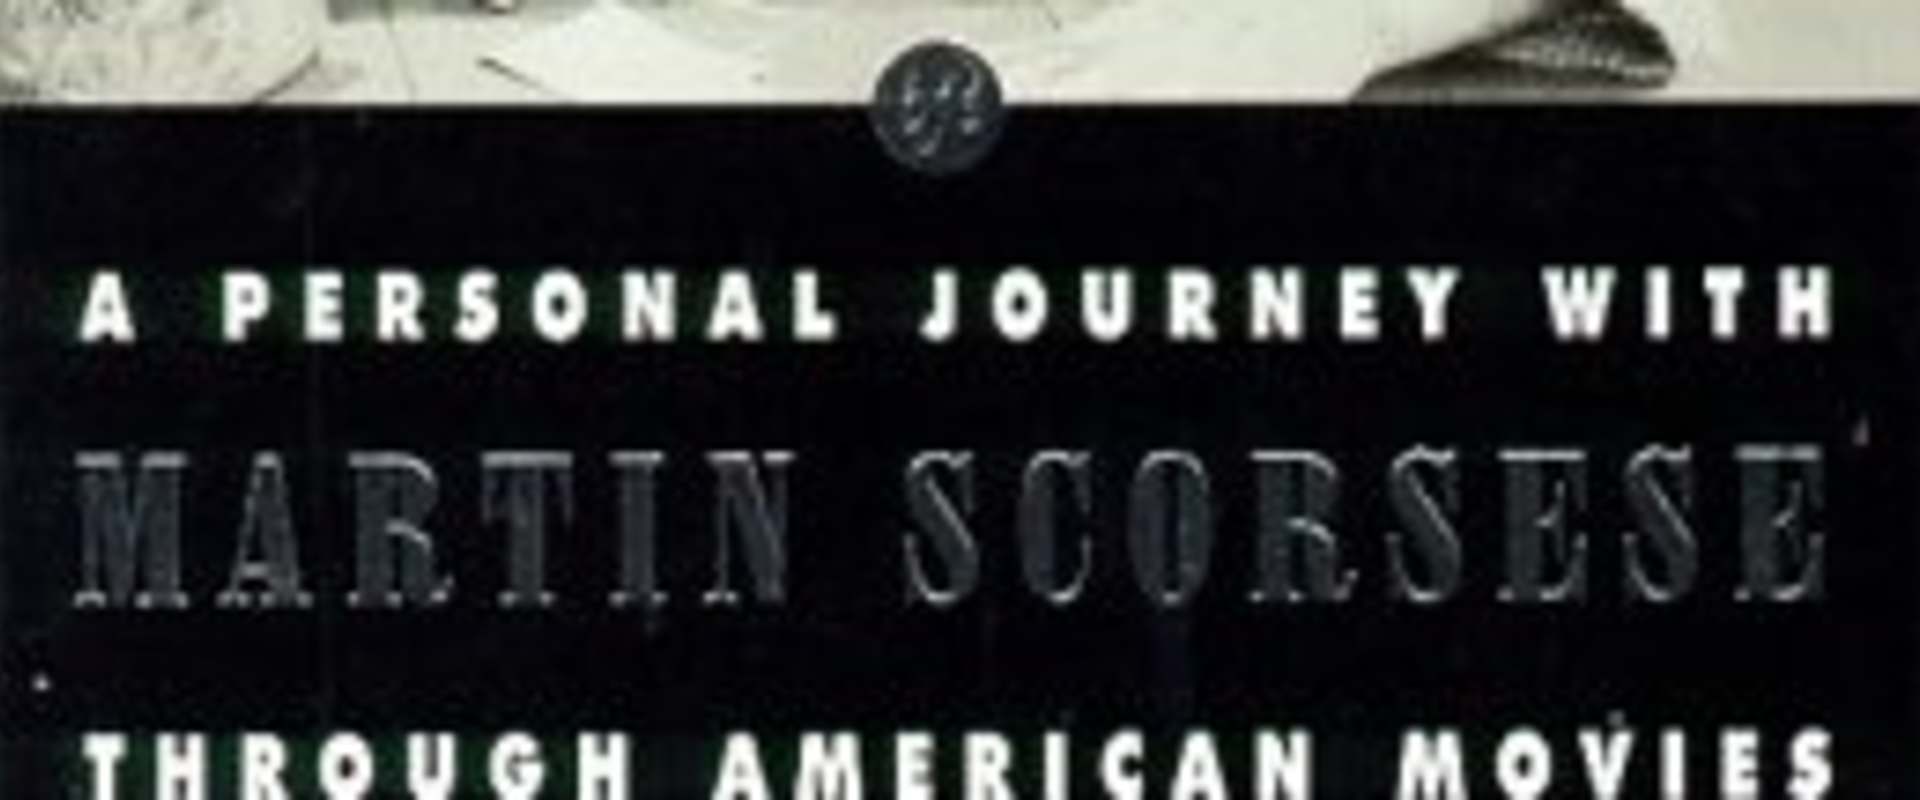 A Personal Journey with Martin Scorsese Through American Movies background 1